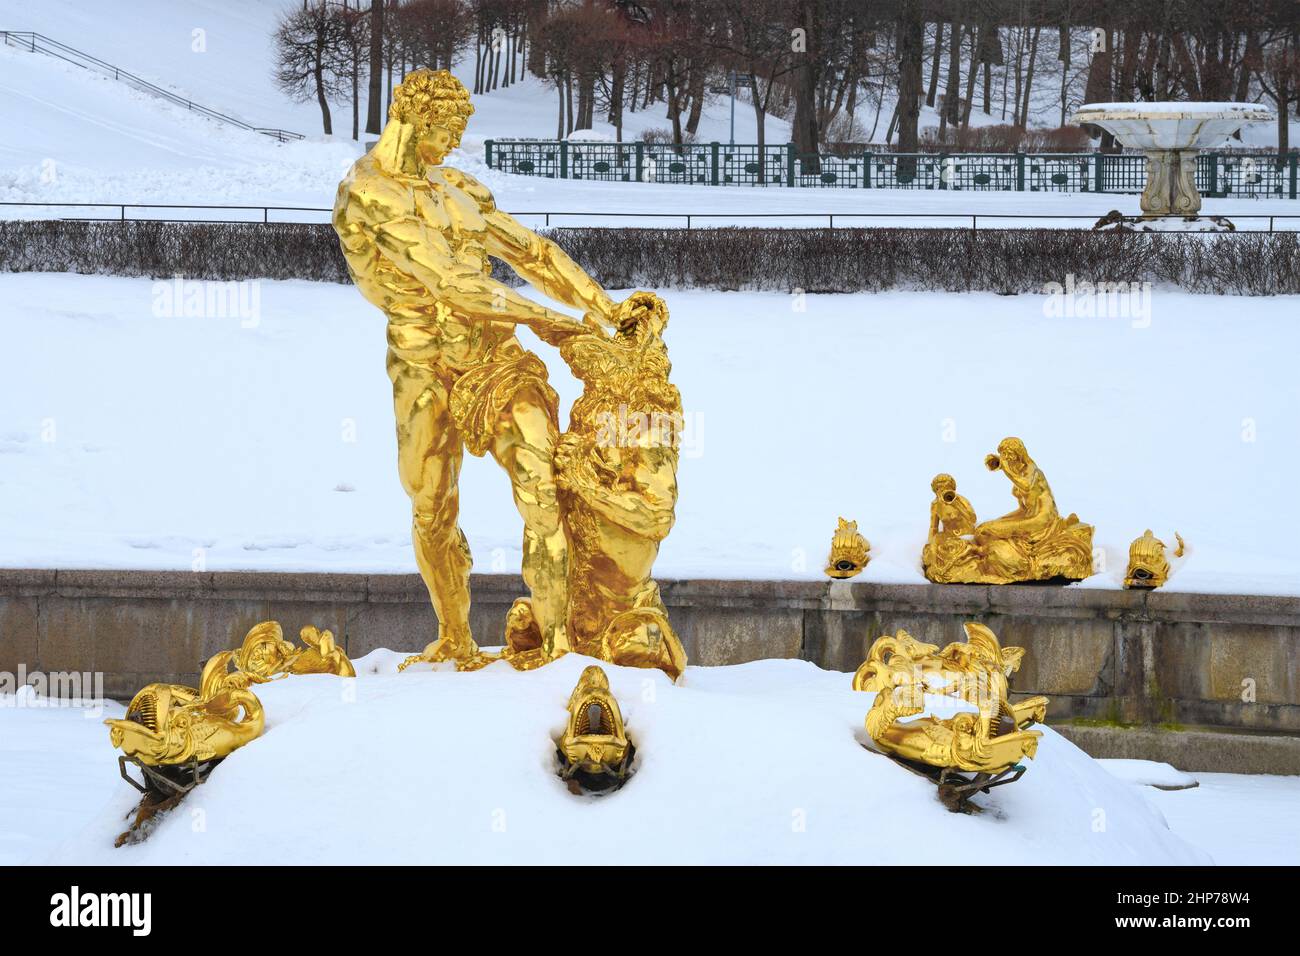 PETRODVORETS, RUSSIA - FEBRUARY 12, 2022: Fountain 'Samson, tearing the mouth of a lion' on a winter day. Peterhof Palace and Park Complex Stock Photo